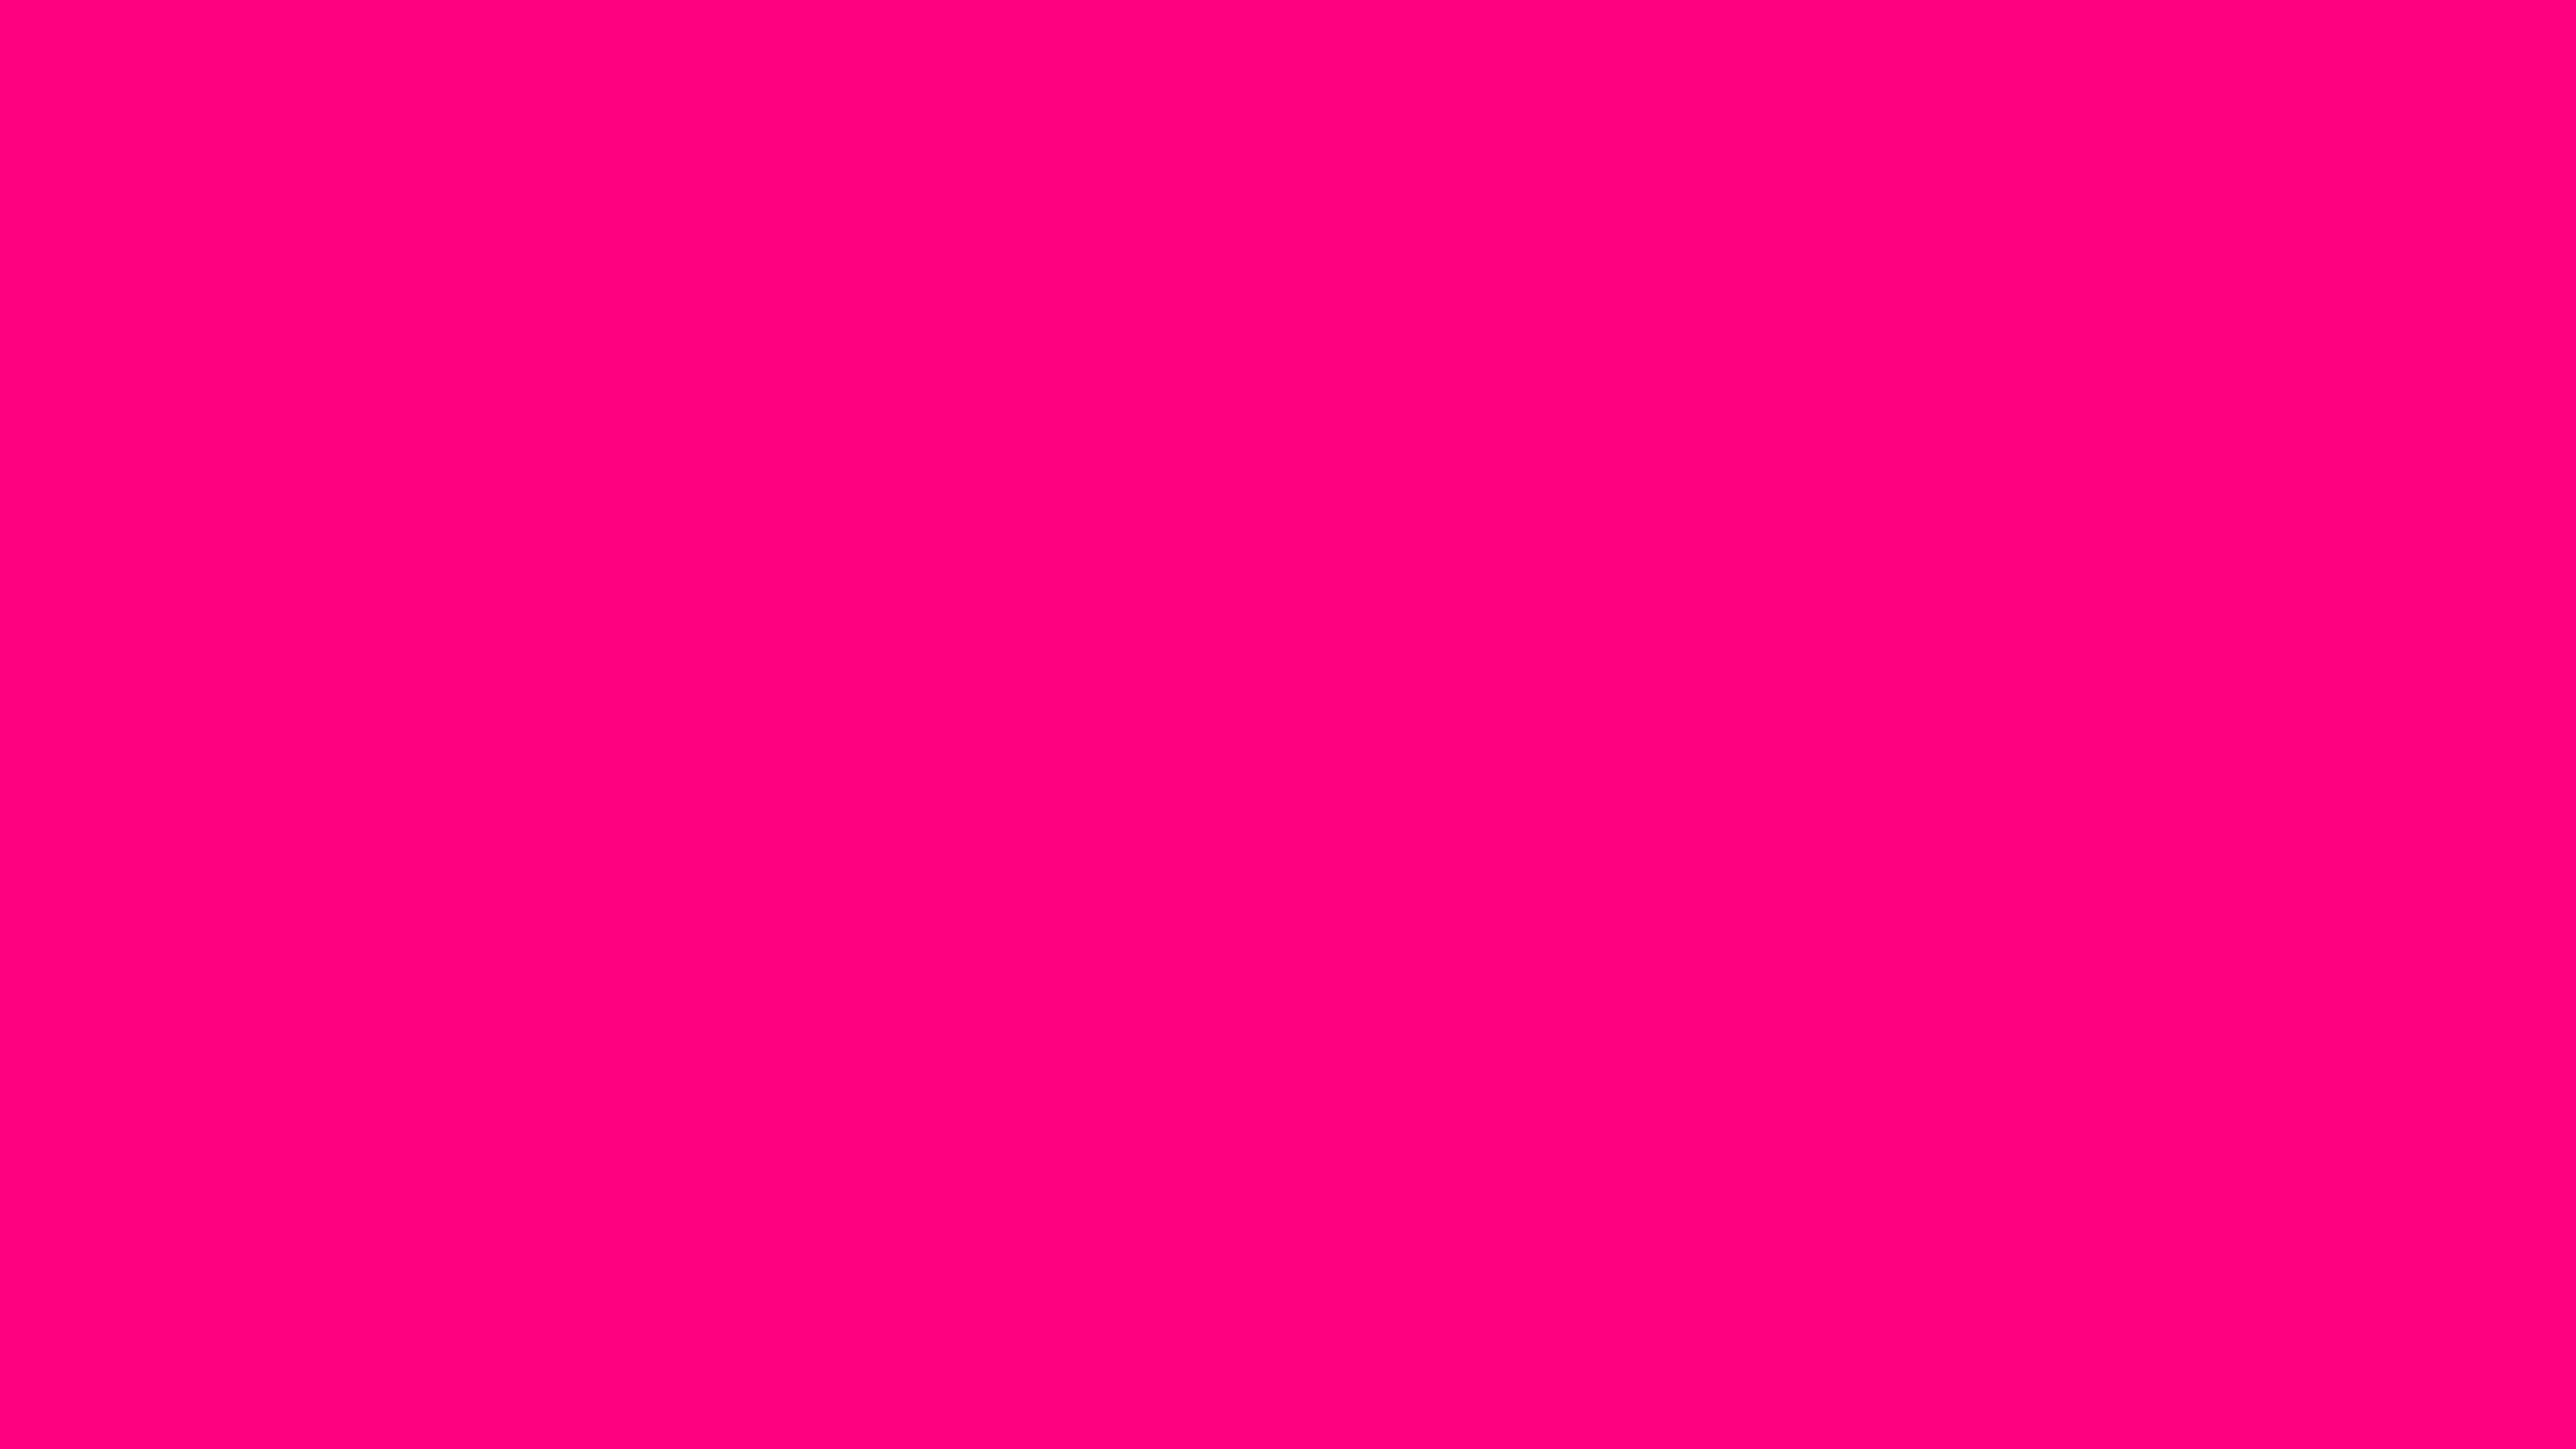 5120x2880 Bright Pink Solid Color Background